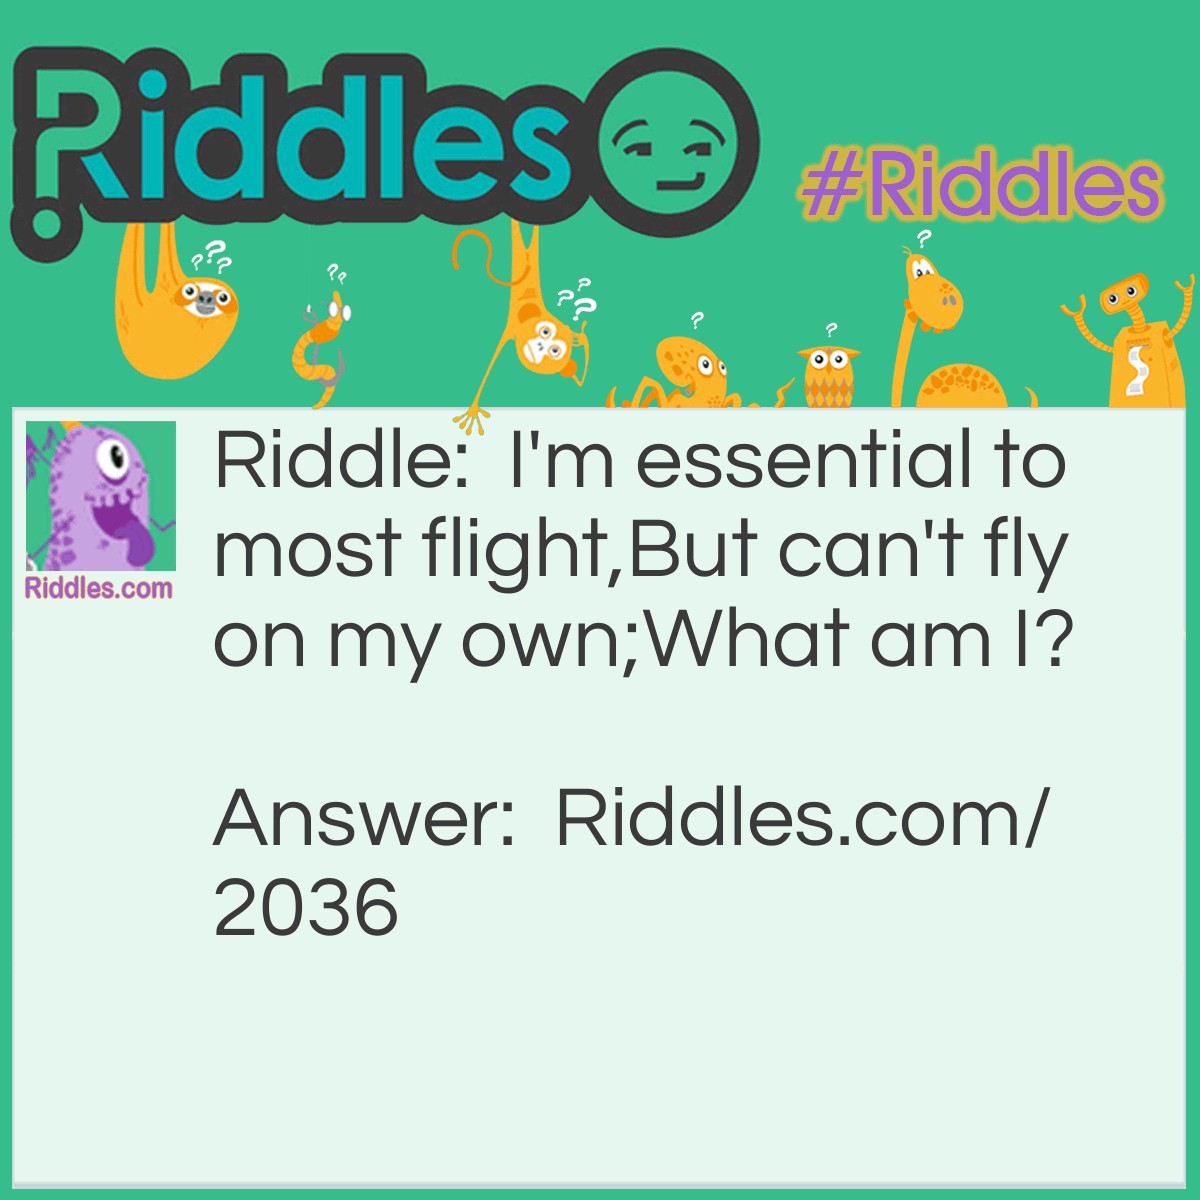 Riddle: I'm essential to most flight,
But can't fly on my own;
What am I? Answer: Feathers 